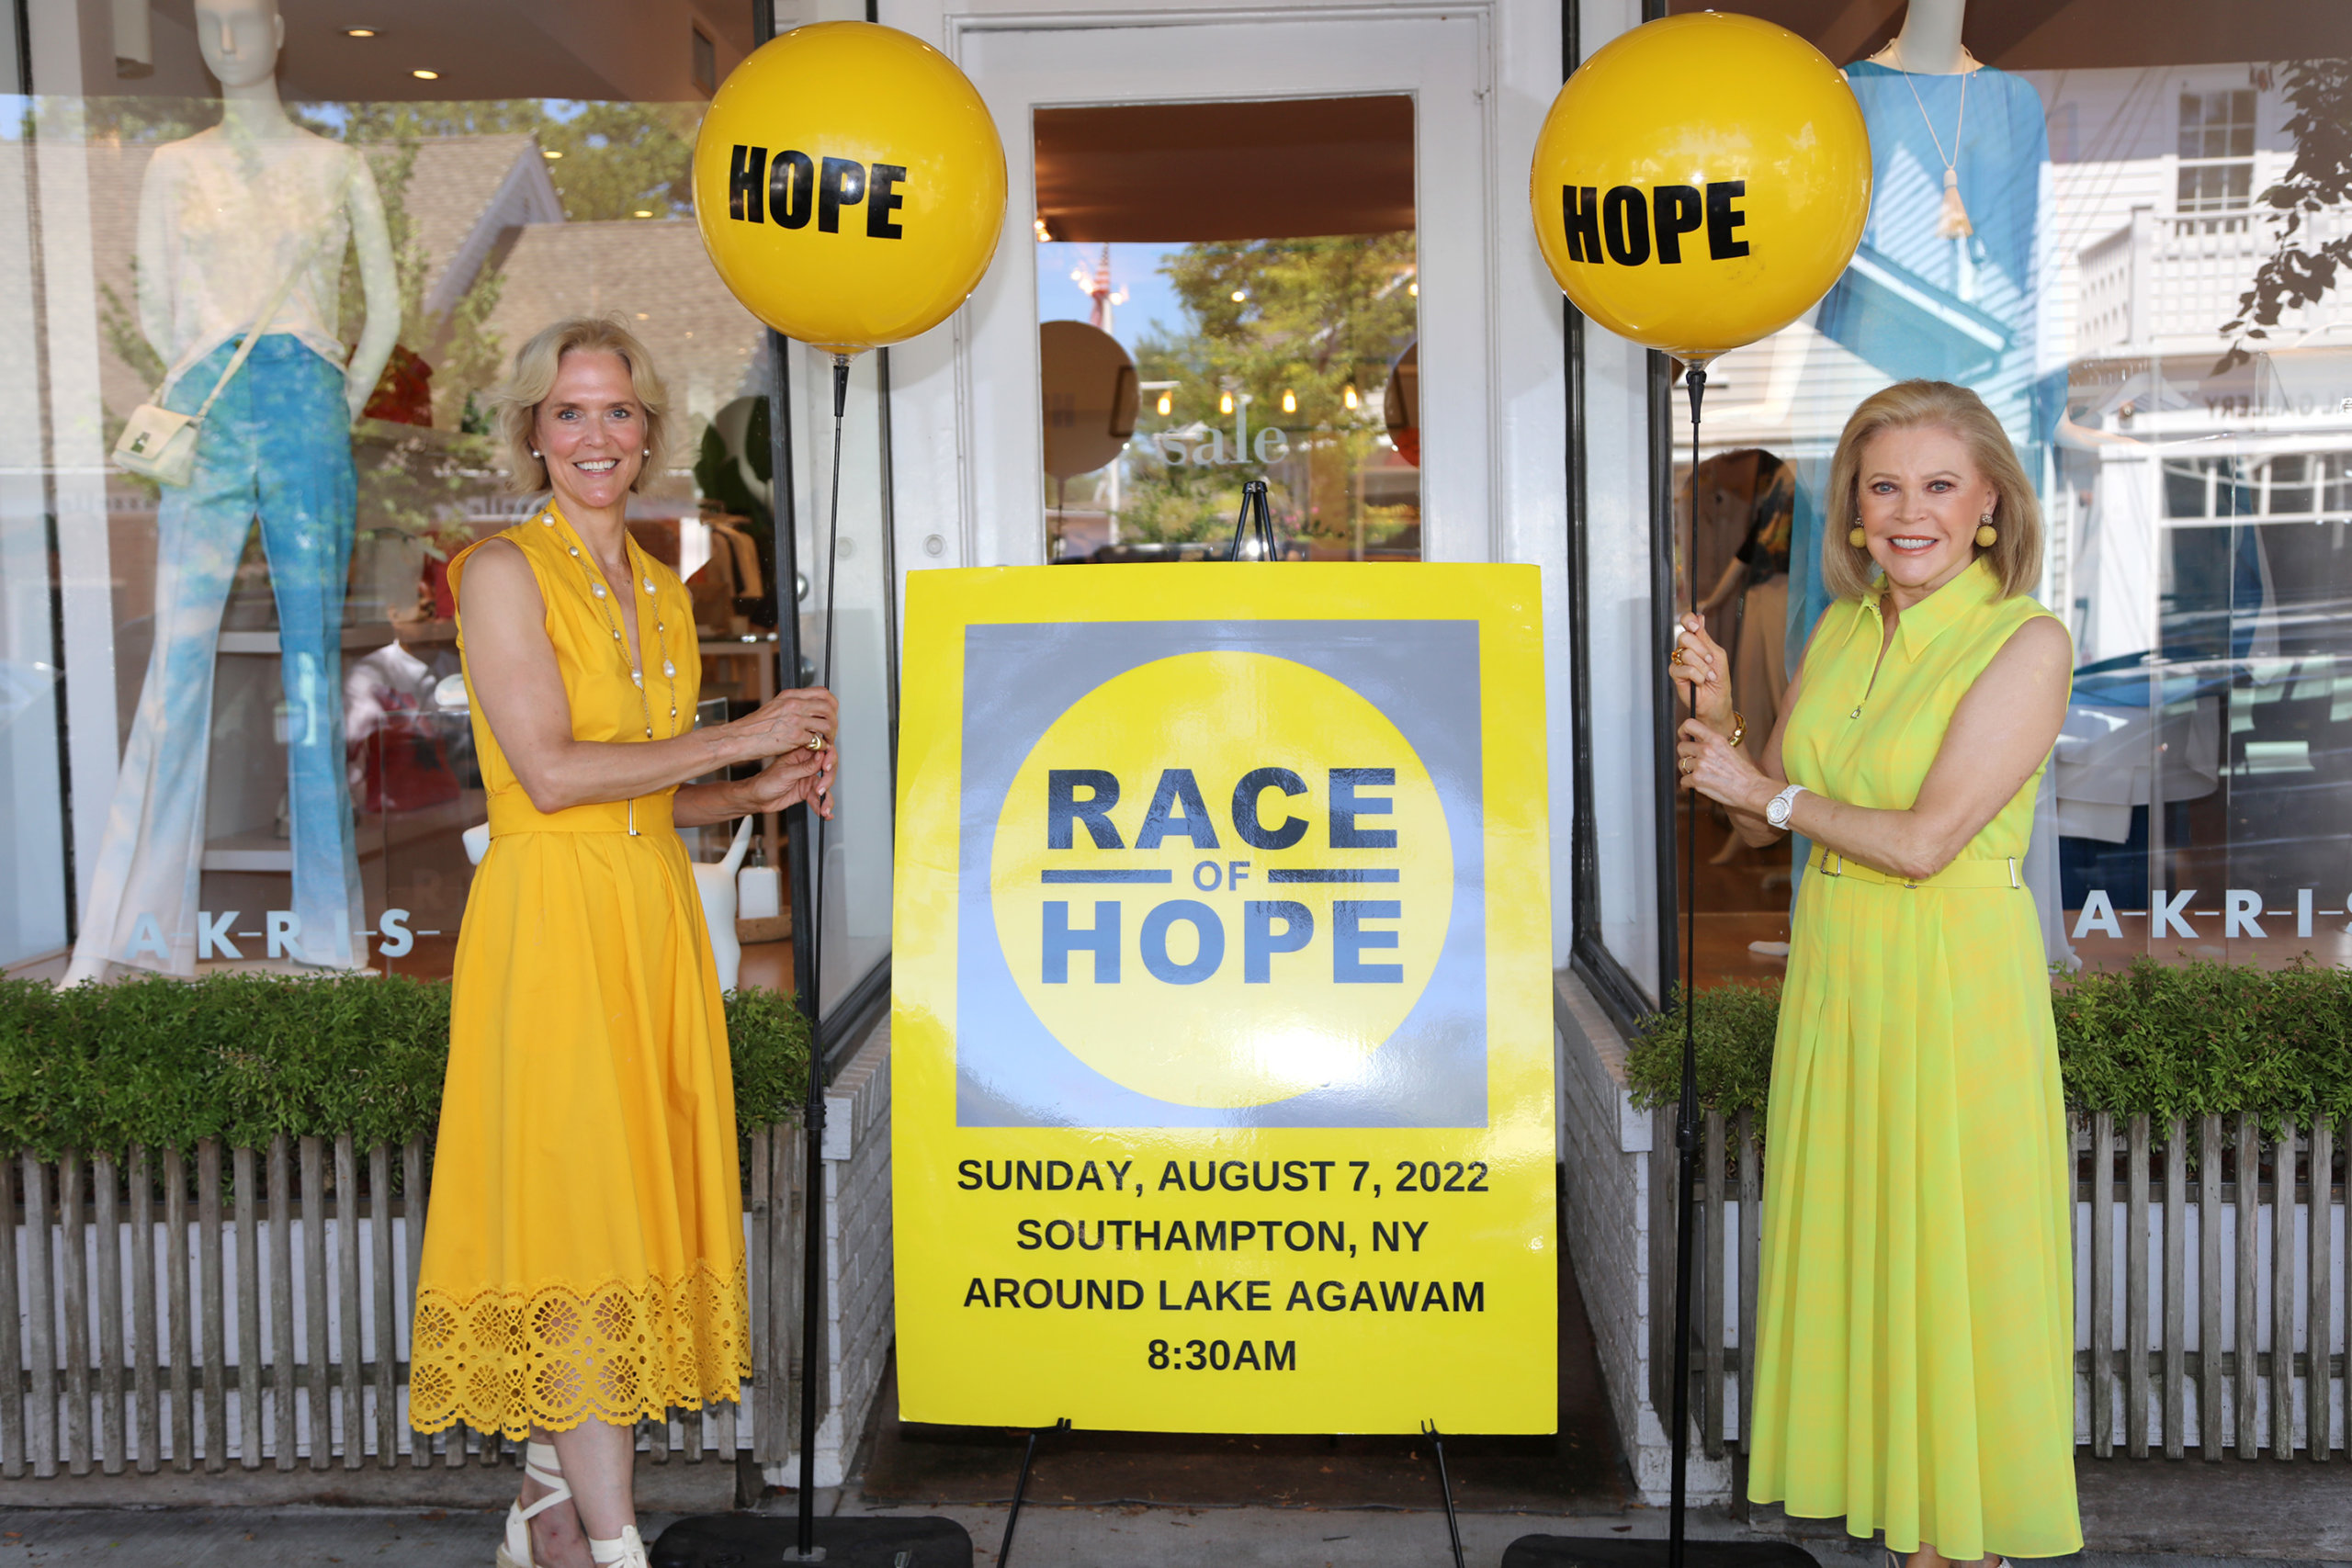 Louisa Benton and Audrey Gruss begin the Week of Hope and Race of Hope in Southampton